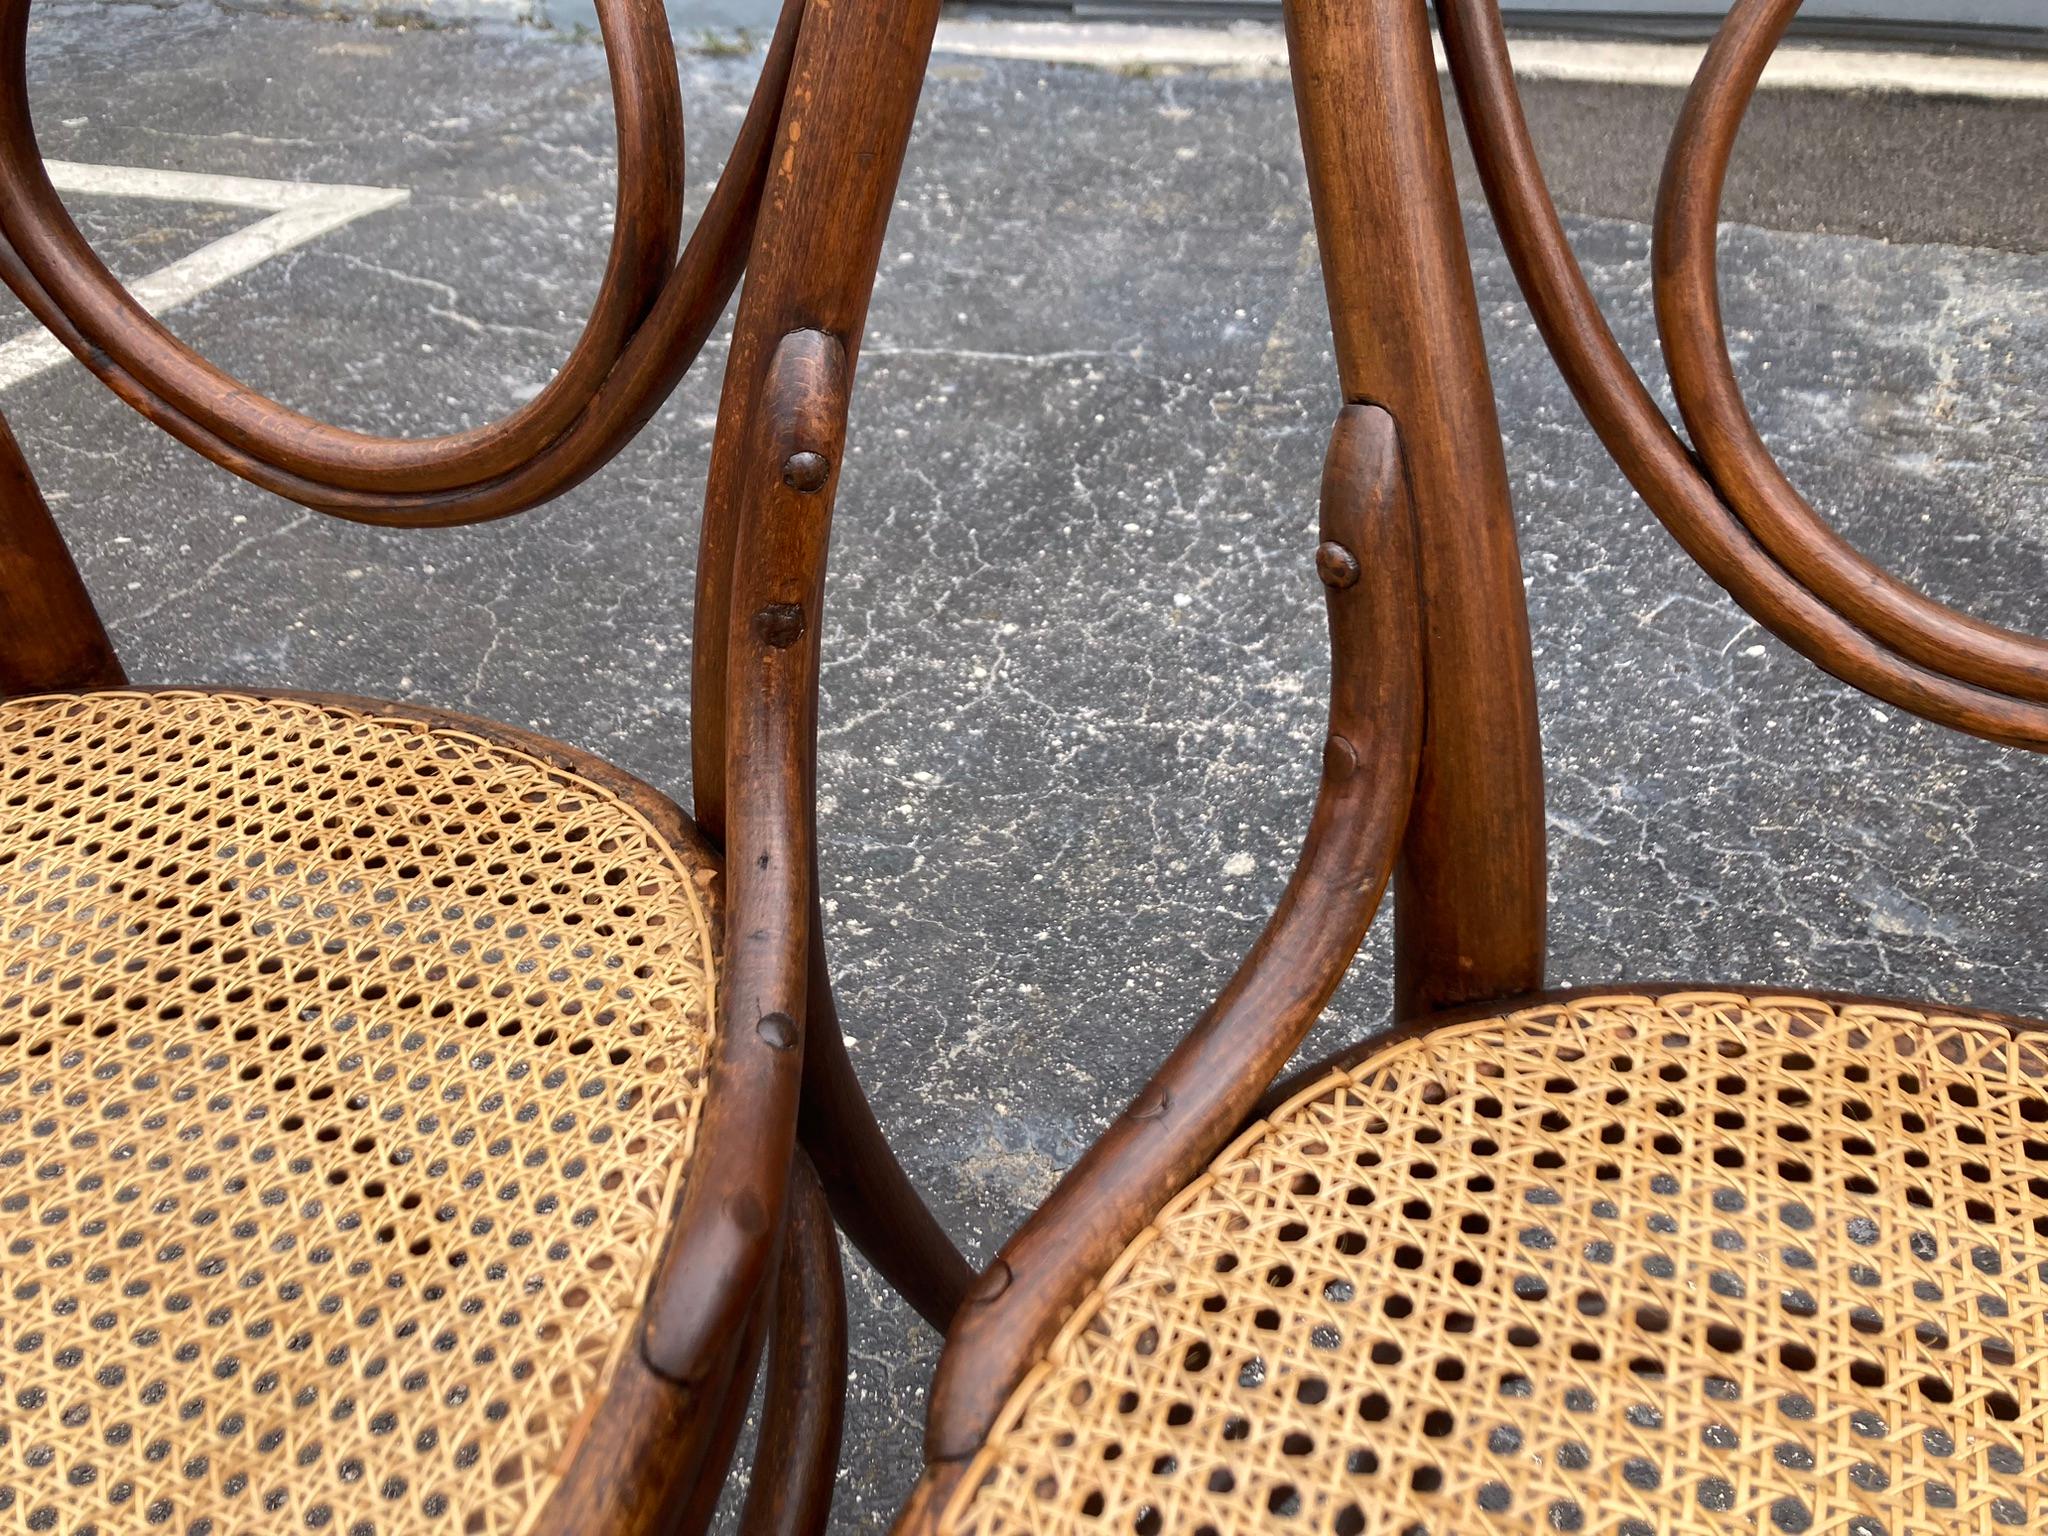 Rare Set of Thonet Chairs Model 13, Bentwood and Cane For Sale 10